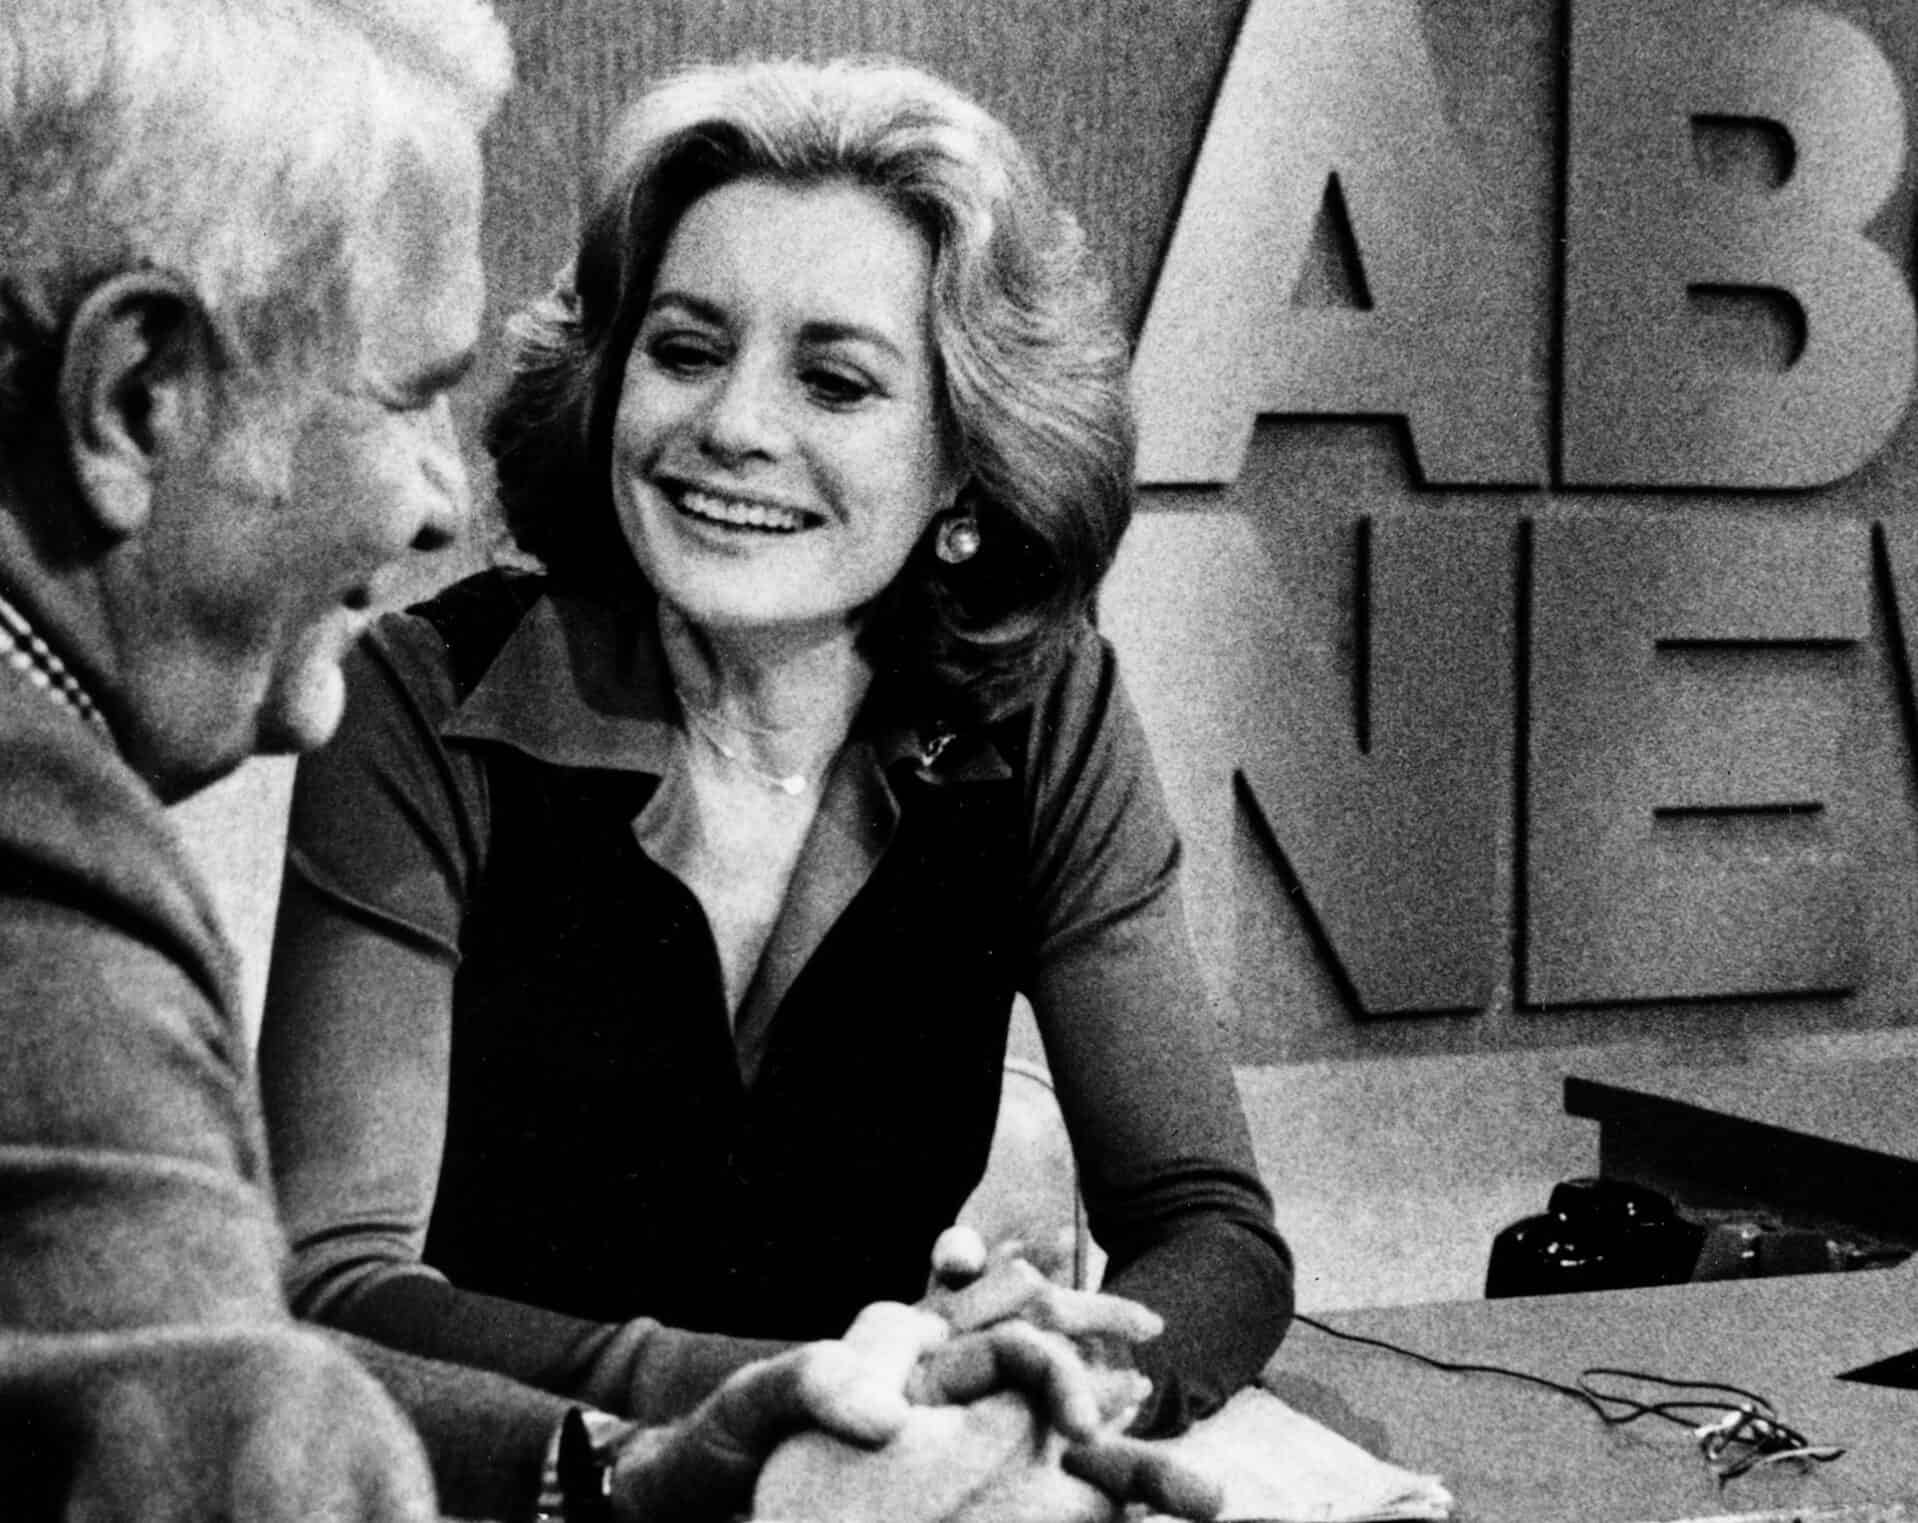 Barbara Walters secured a groundbreaking five-year, $5 million contract with ABC, making her the highest-paid news anchor, regardless of gender